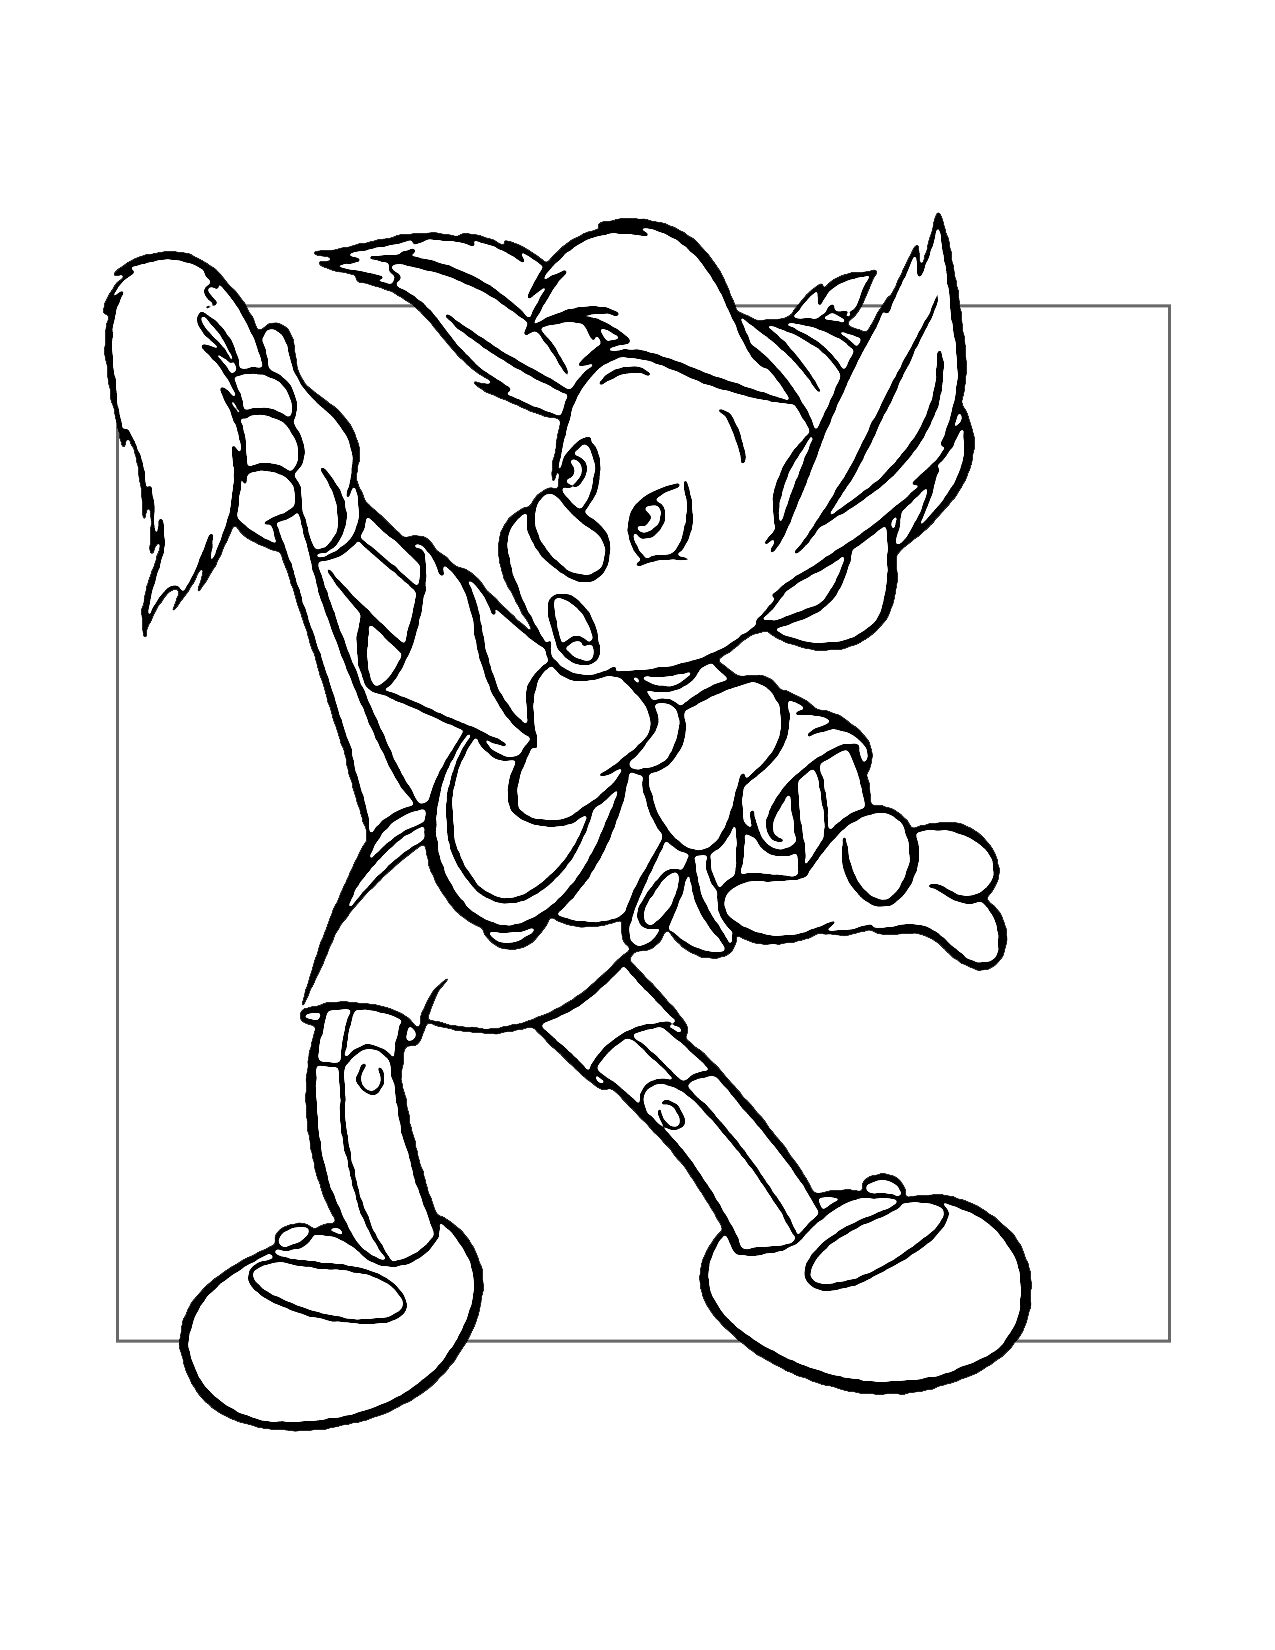 Pinocchio Turns Into A Donkey Coloring Page